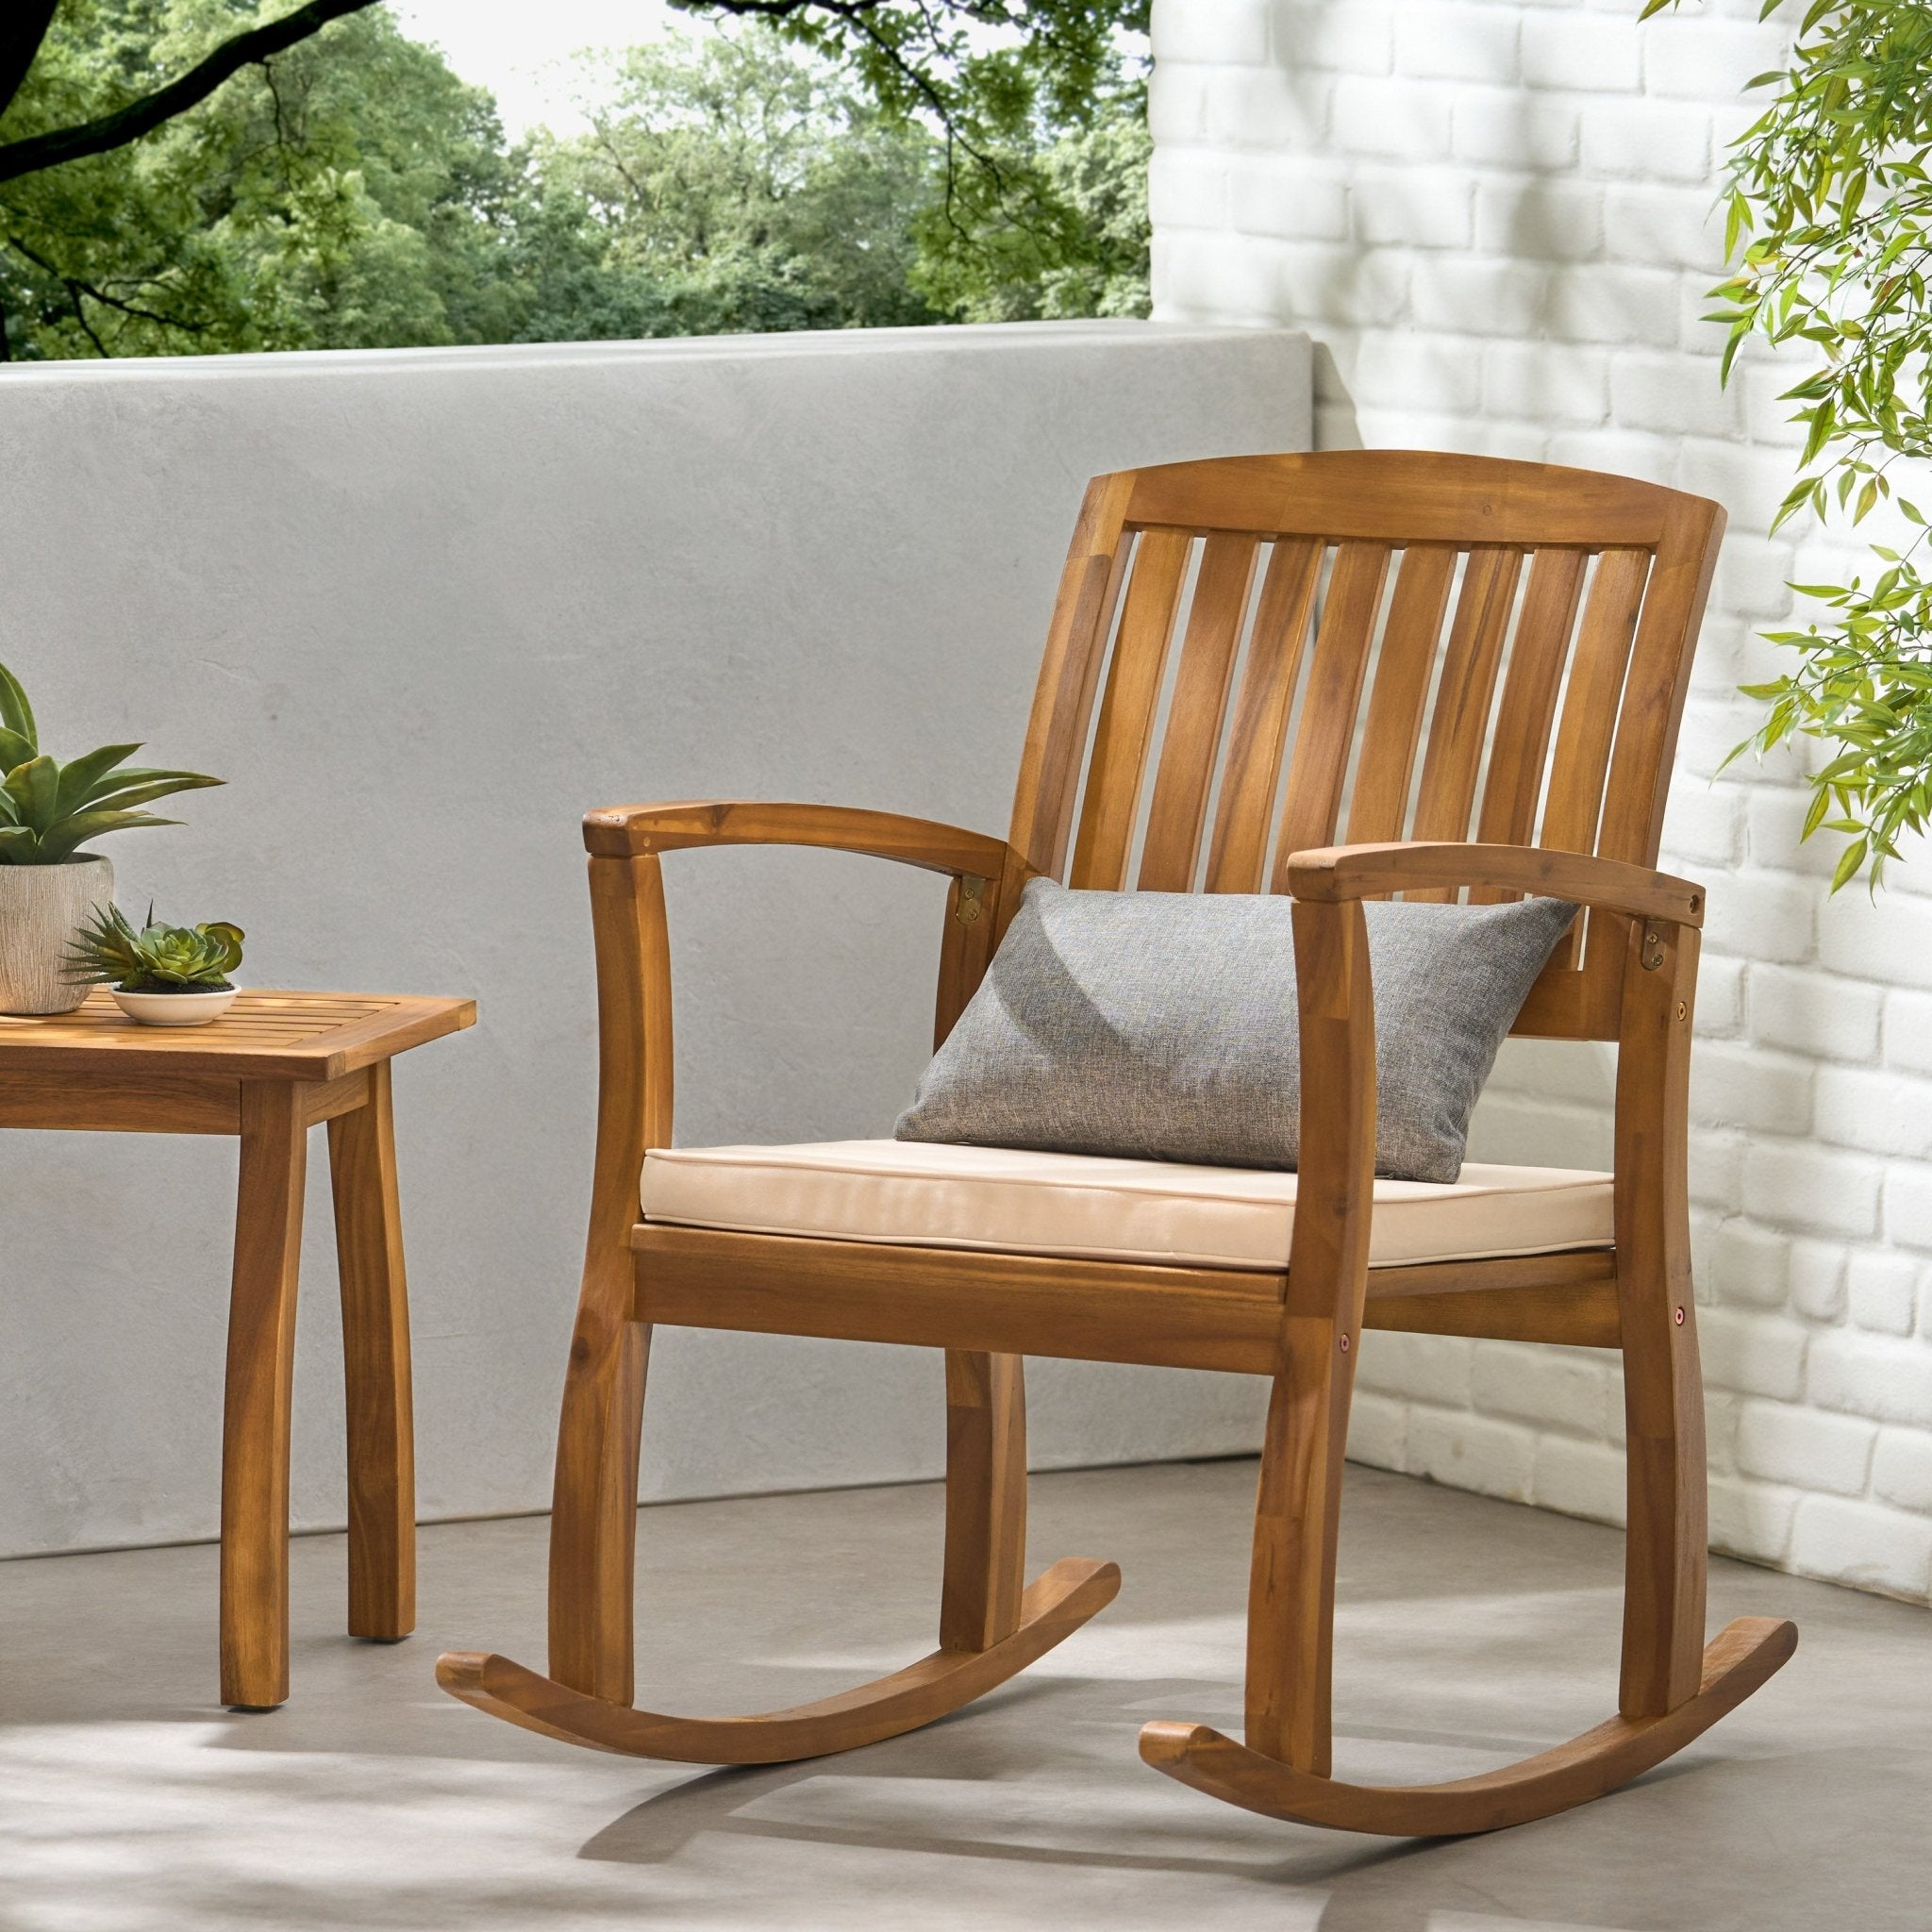 Acacia Wood Outdoor Rocking Chair with Slat Panel Design